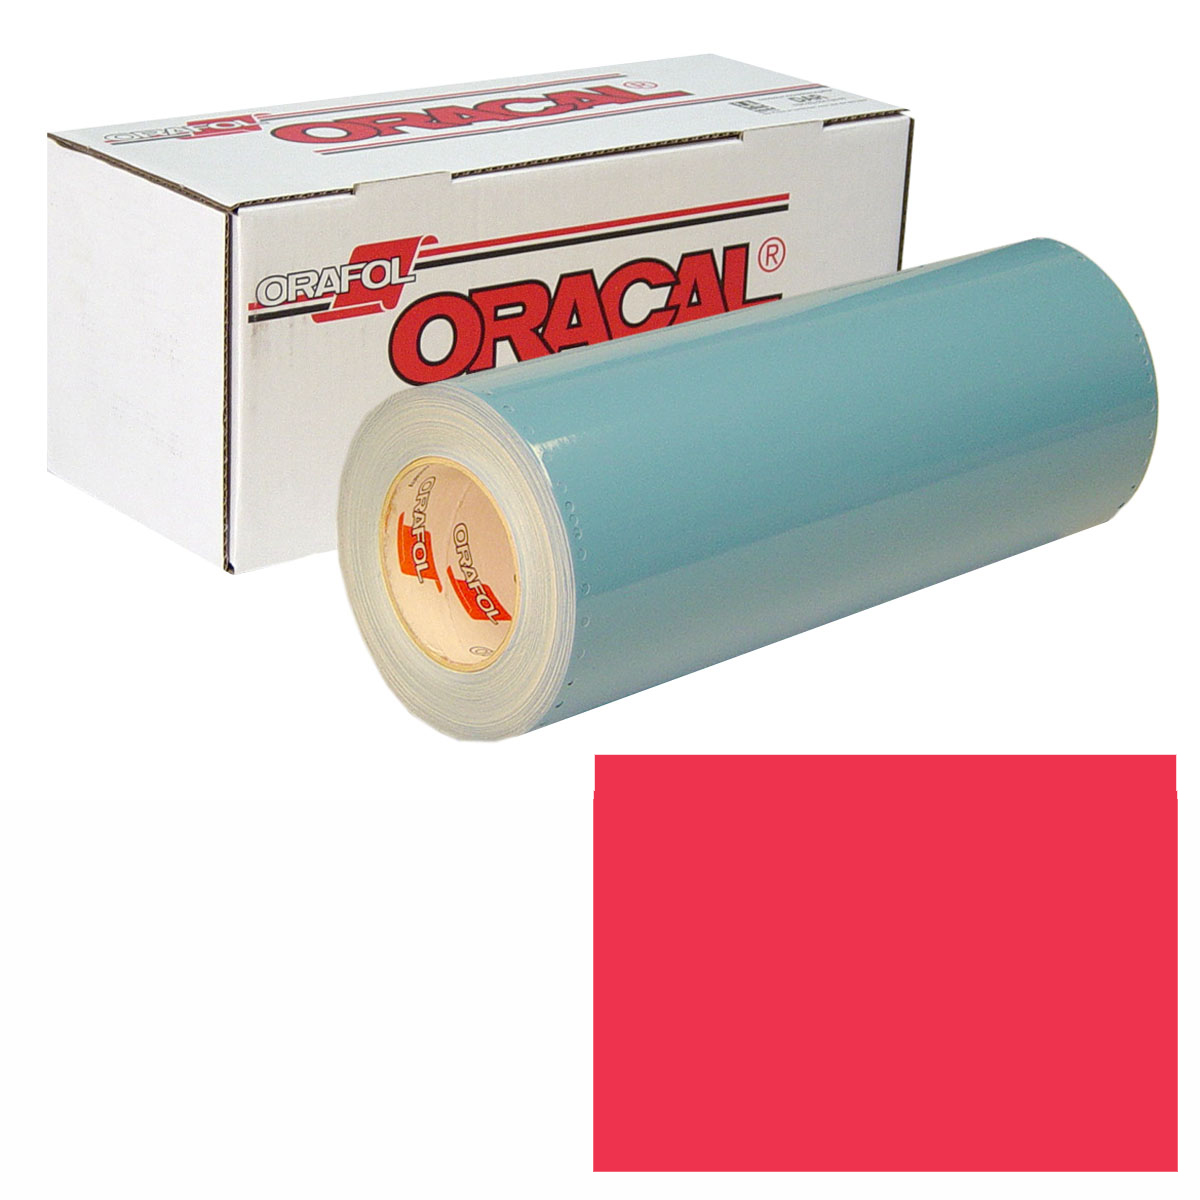 ORACAL 951 30in X 10yd 324 Blood Red